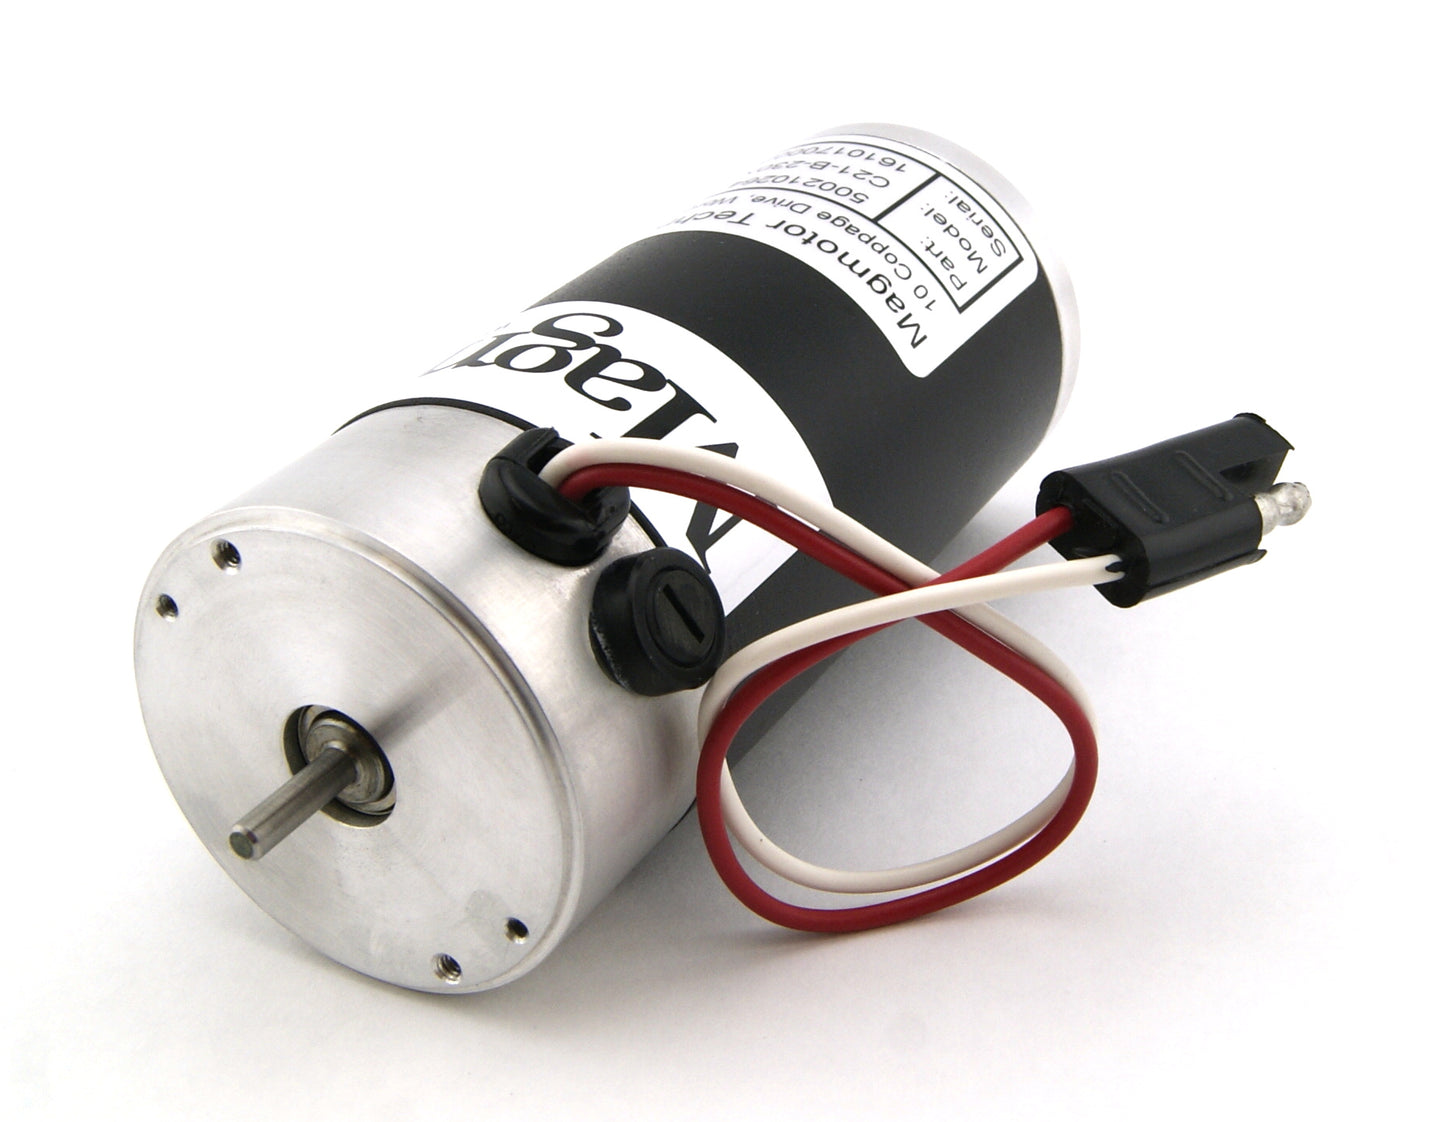 Magmotor C21-B-230X 9 to 18 Volt 2 Pole Brushed Motor 500210264 Rear View